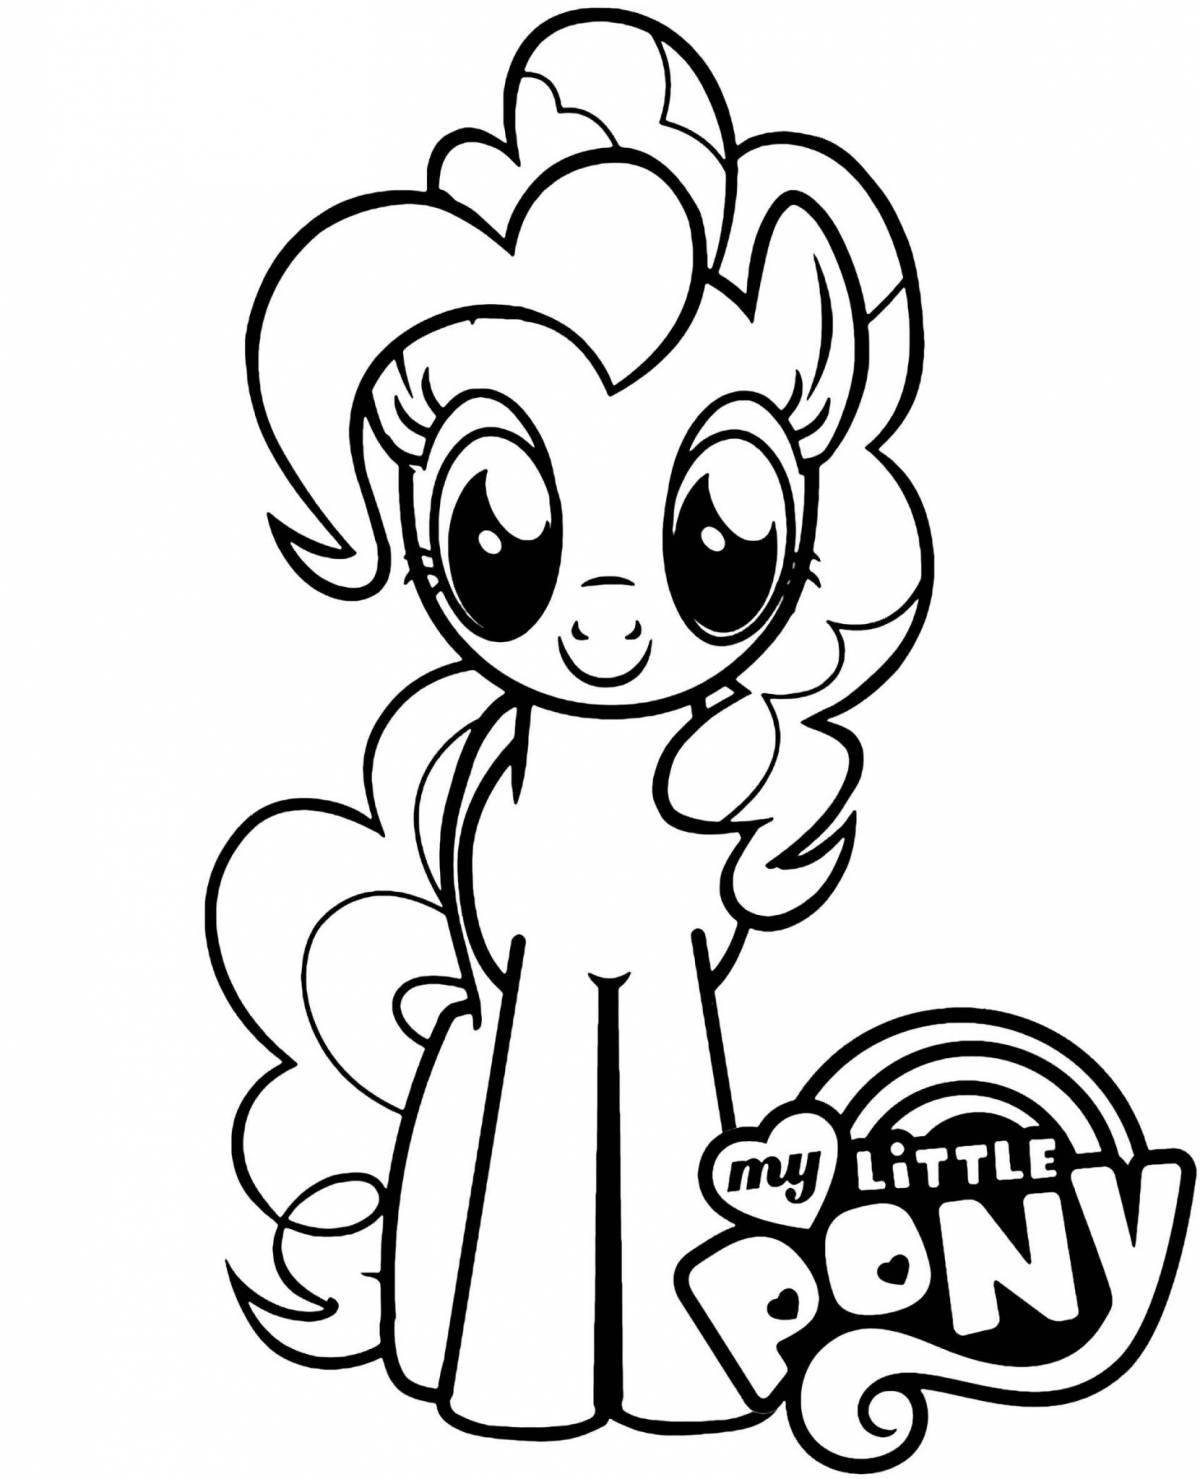 My little pony pinkie pie coloring